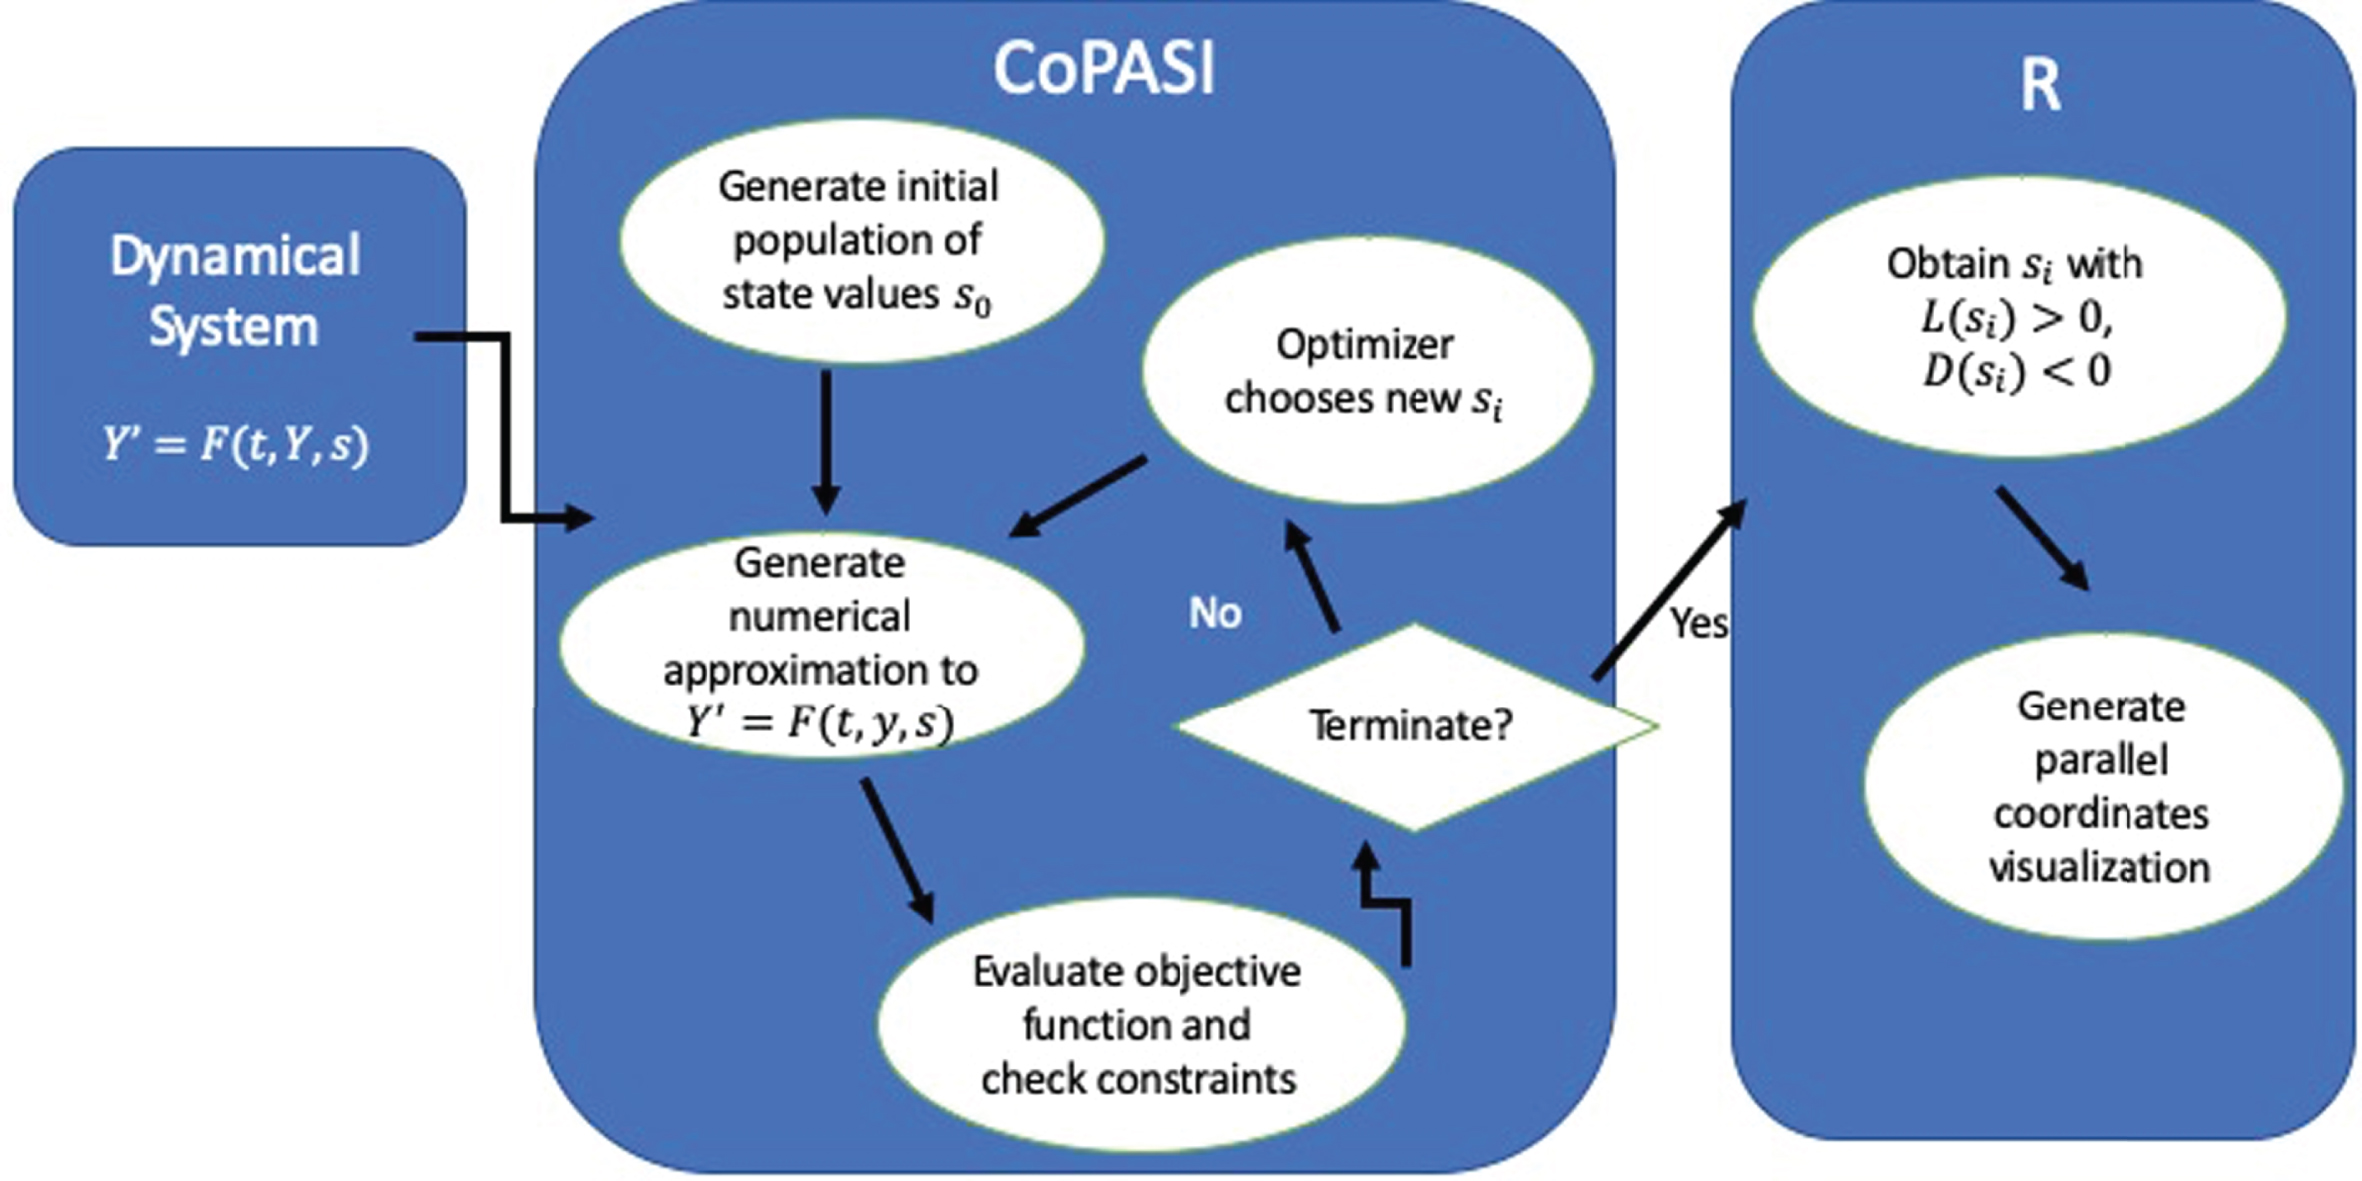 Flowchart of the simulation framework. The data returned from COPASI is handed to R to generate the parallel coordinates visualization. Any optimization algorithm can be used to explore the design space.